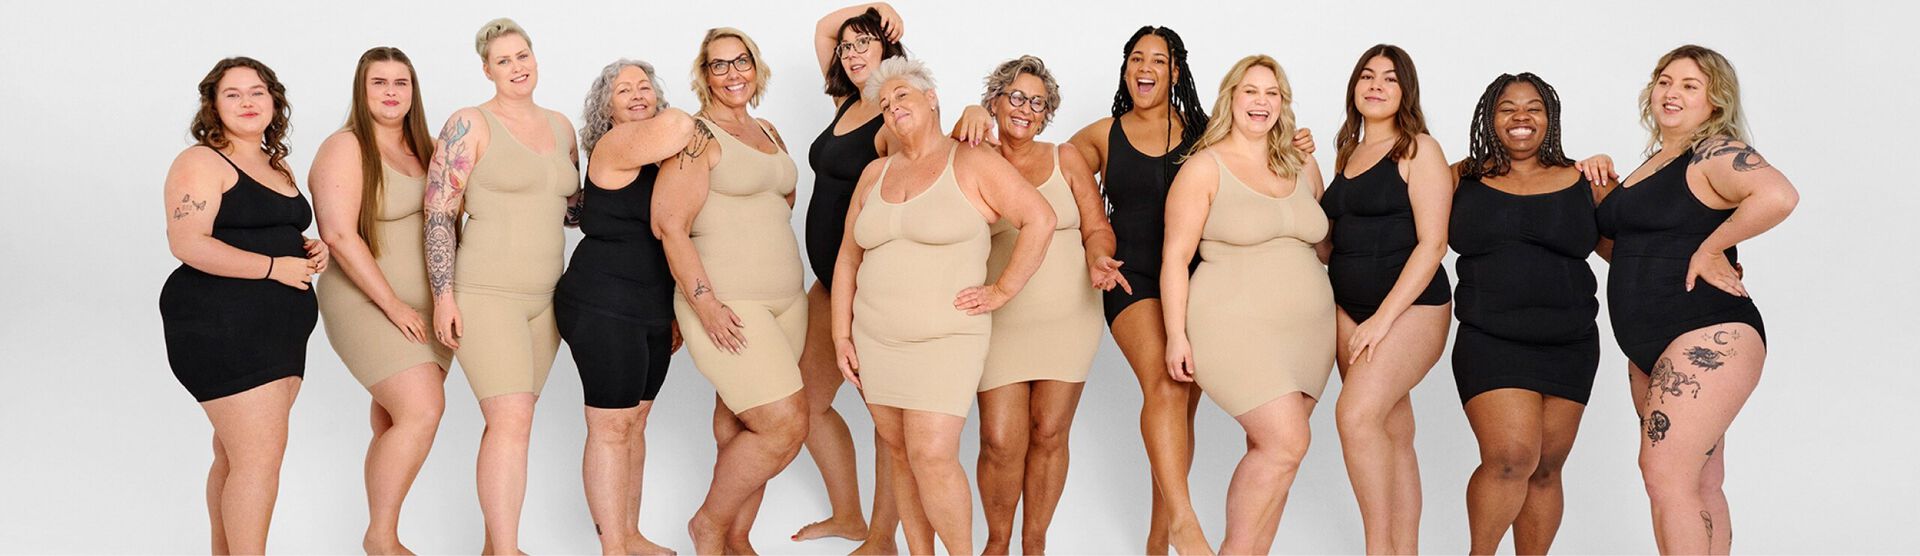 Beginners Guide to Shapewear, How to buy and wear shapewear for your body